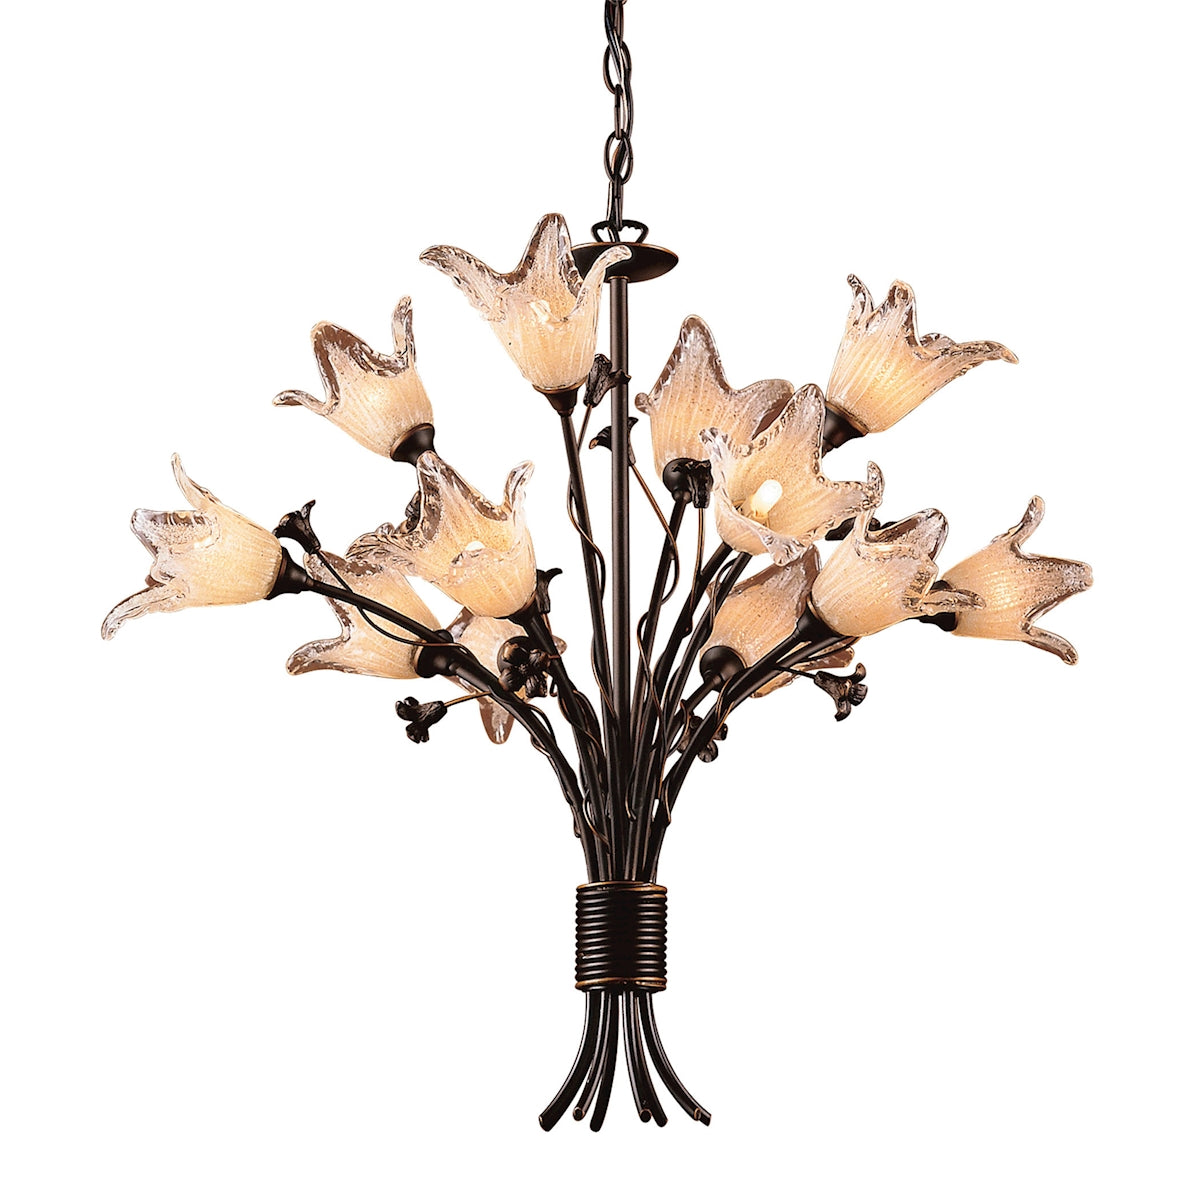 ELK Lighting 7959/8+4 Fioritura 12-Light Chandelier in Aged Bronze with Floral-shaped Glass